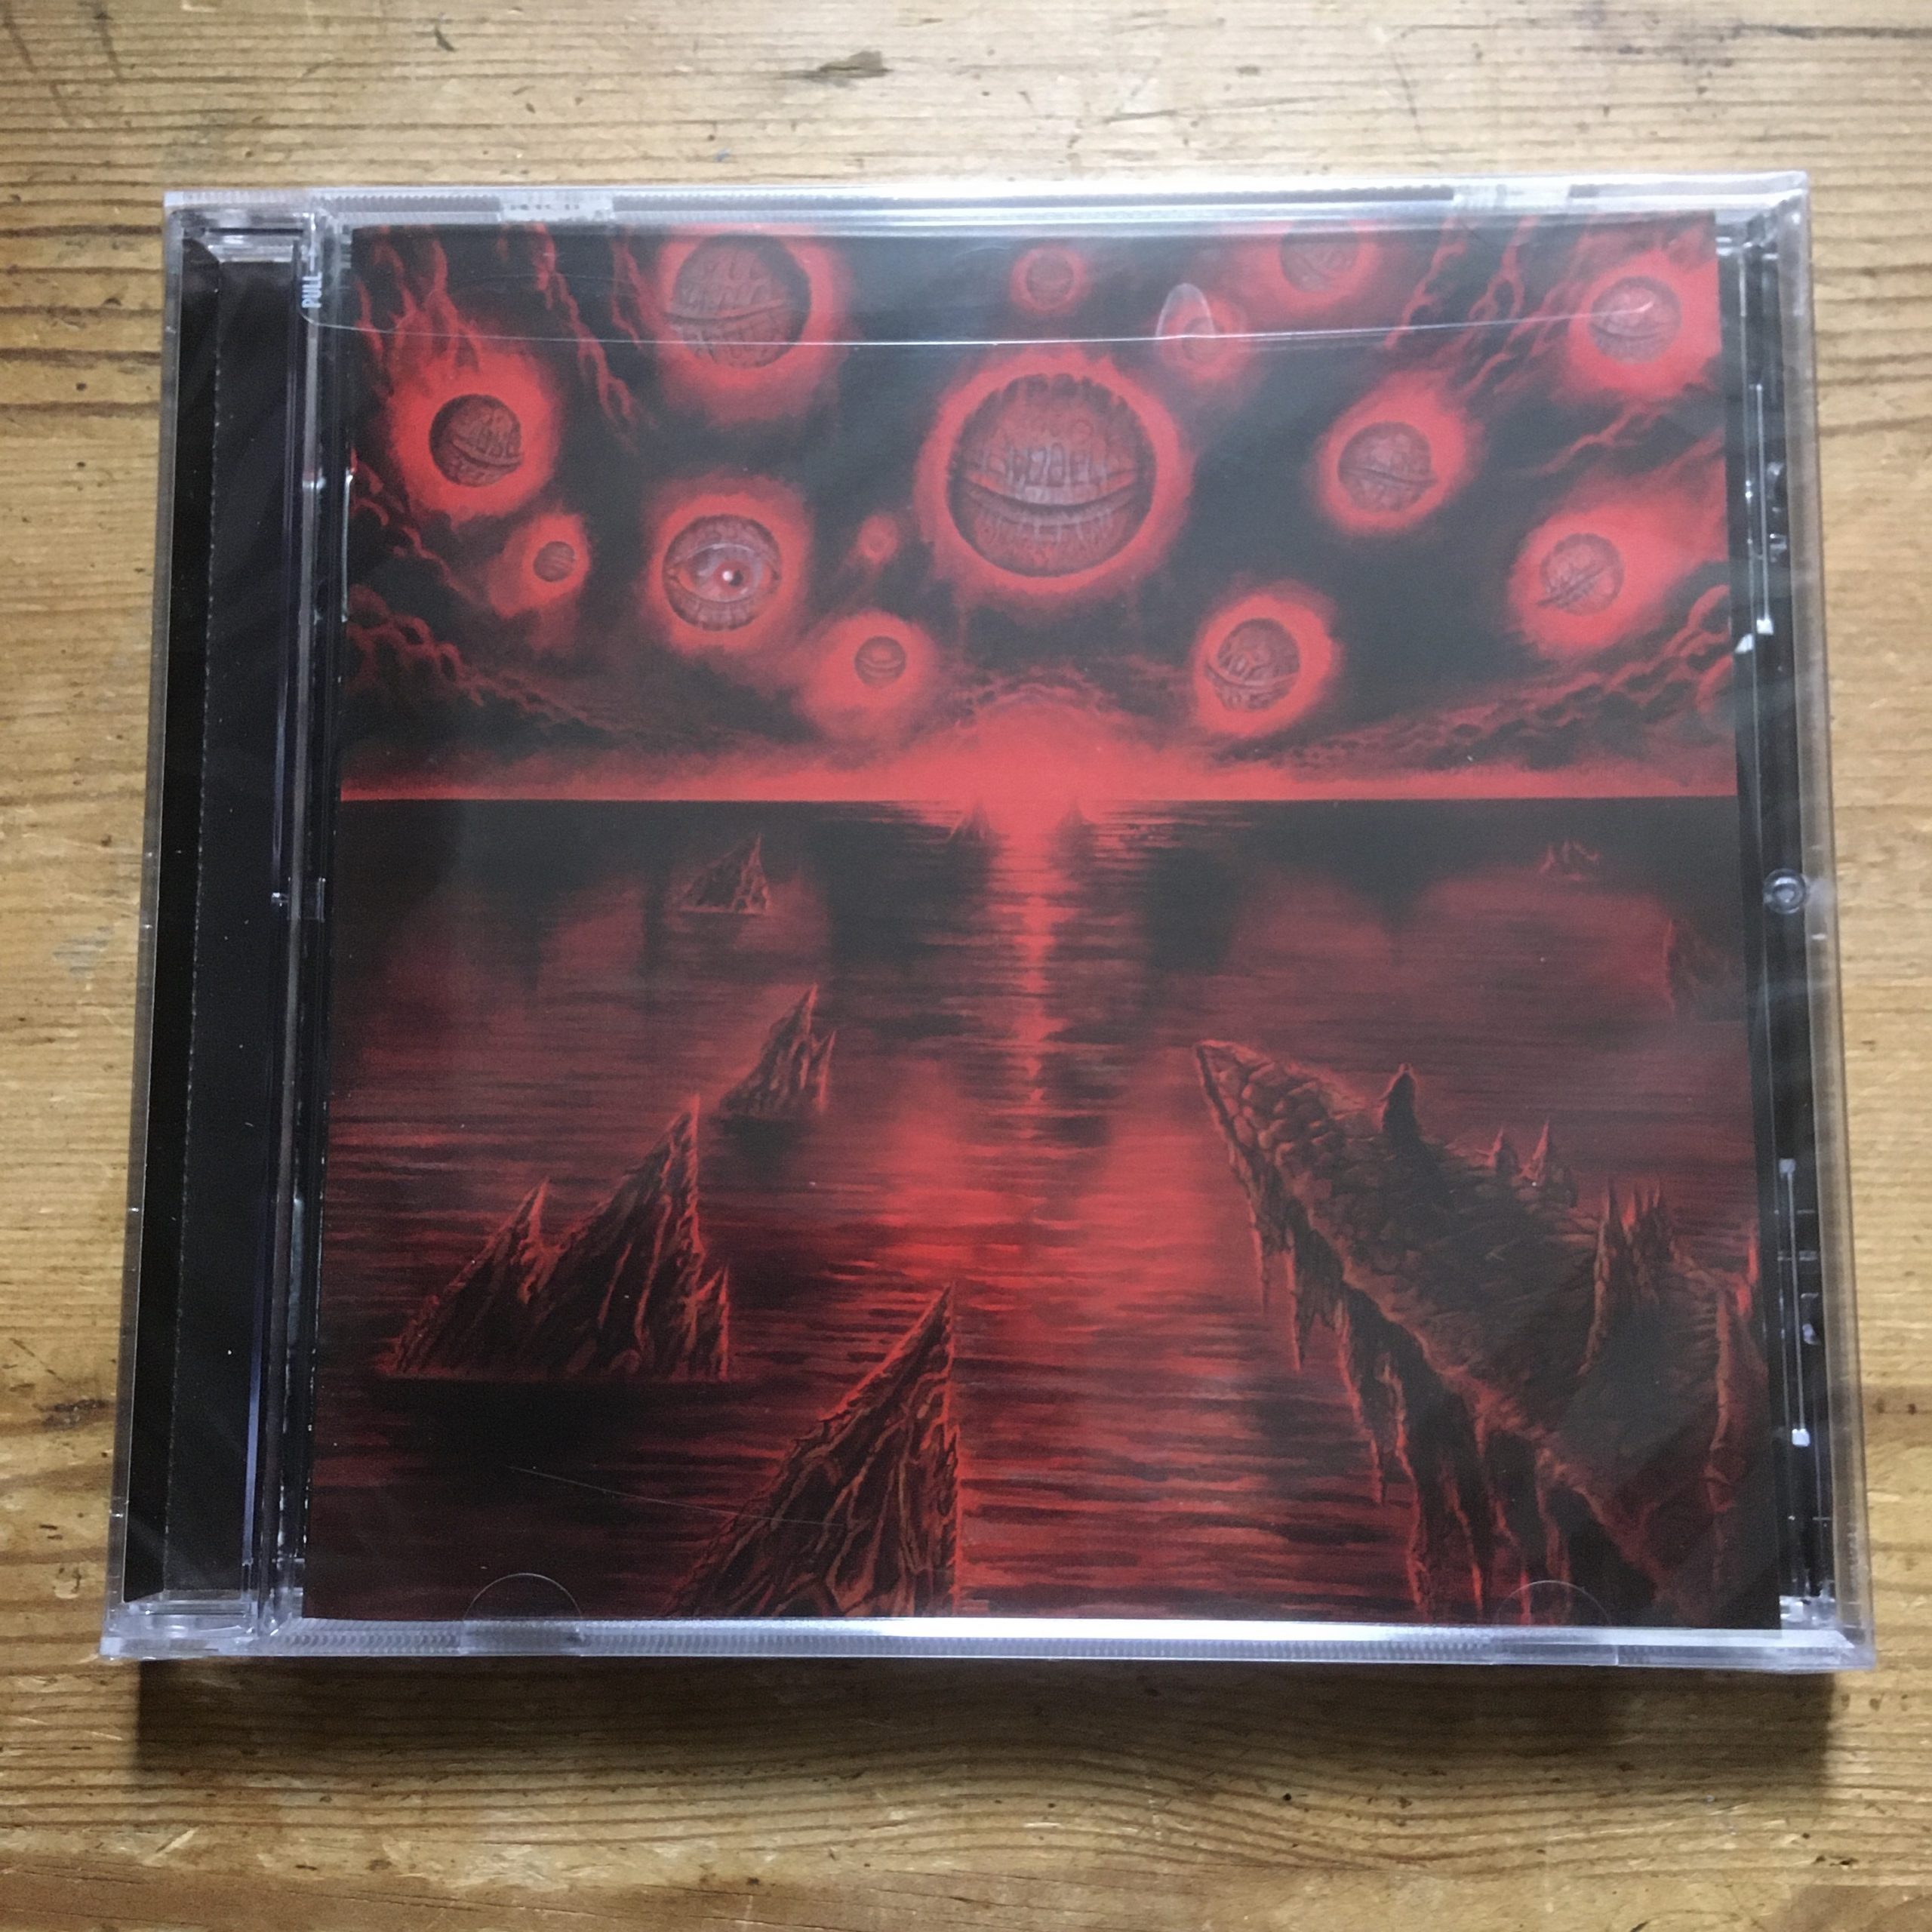 Photo of the Gorephilia - "In the Eye of Nothing" CD